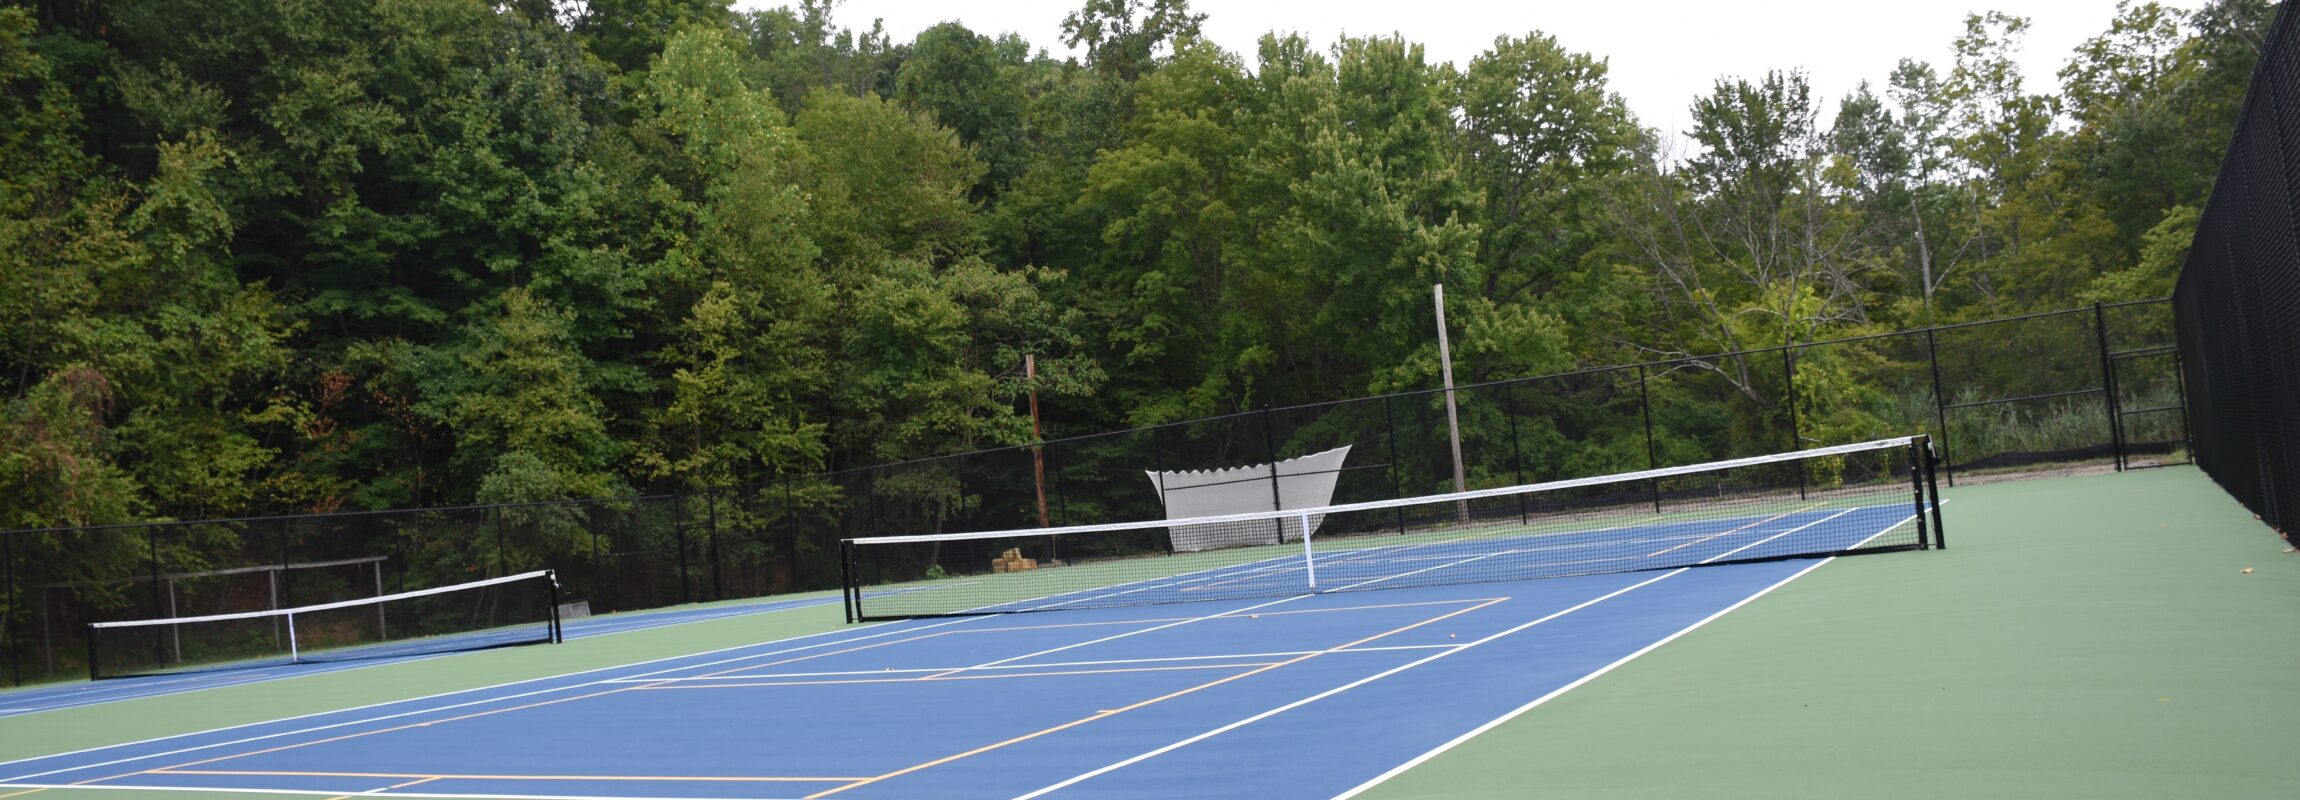 Mainside Tennis Courts